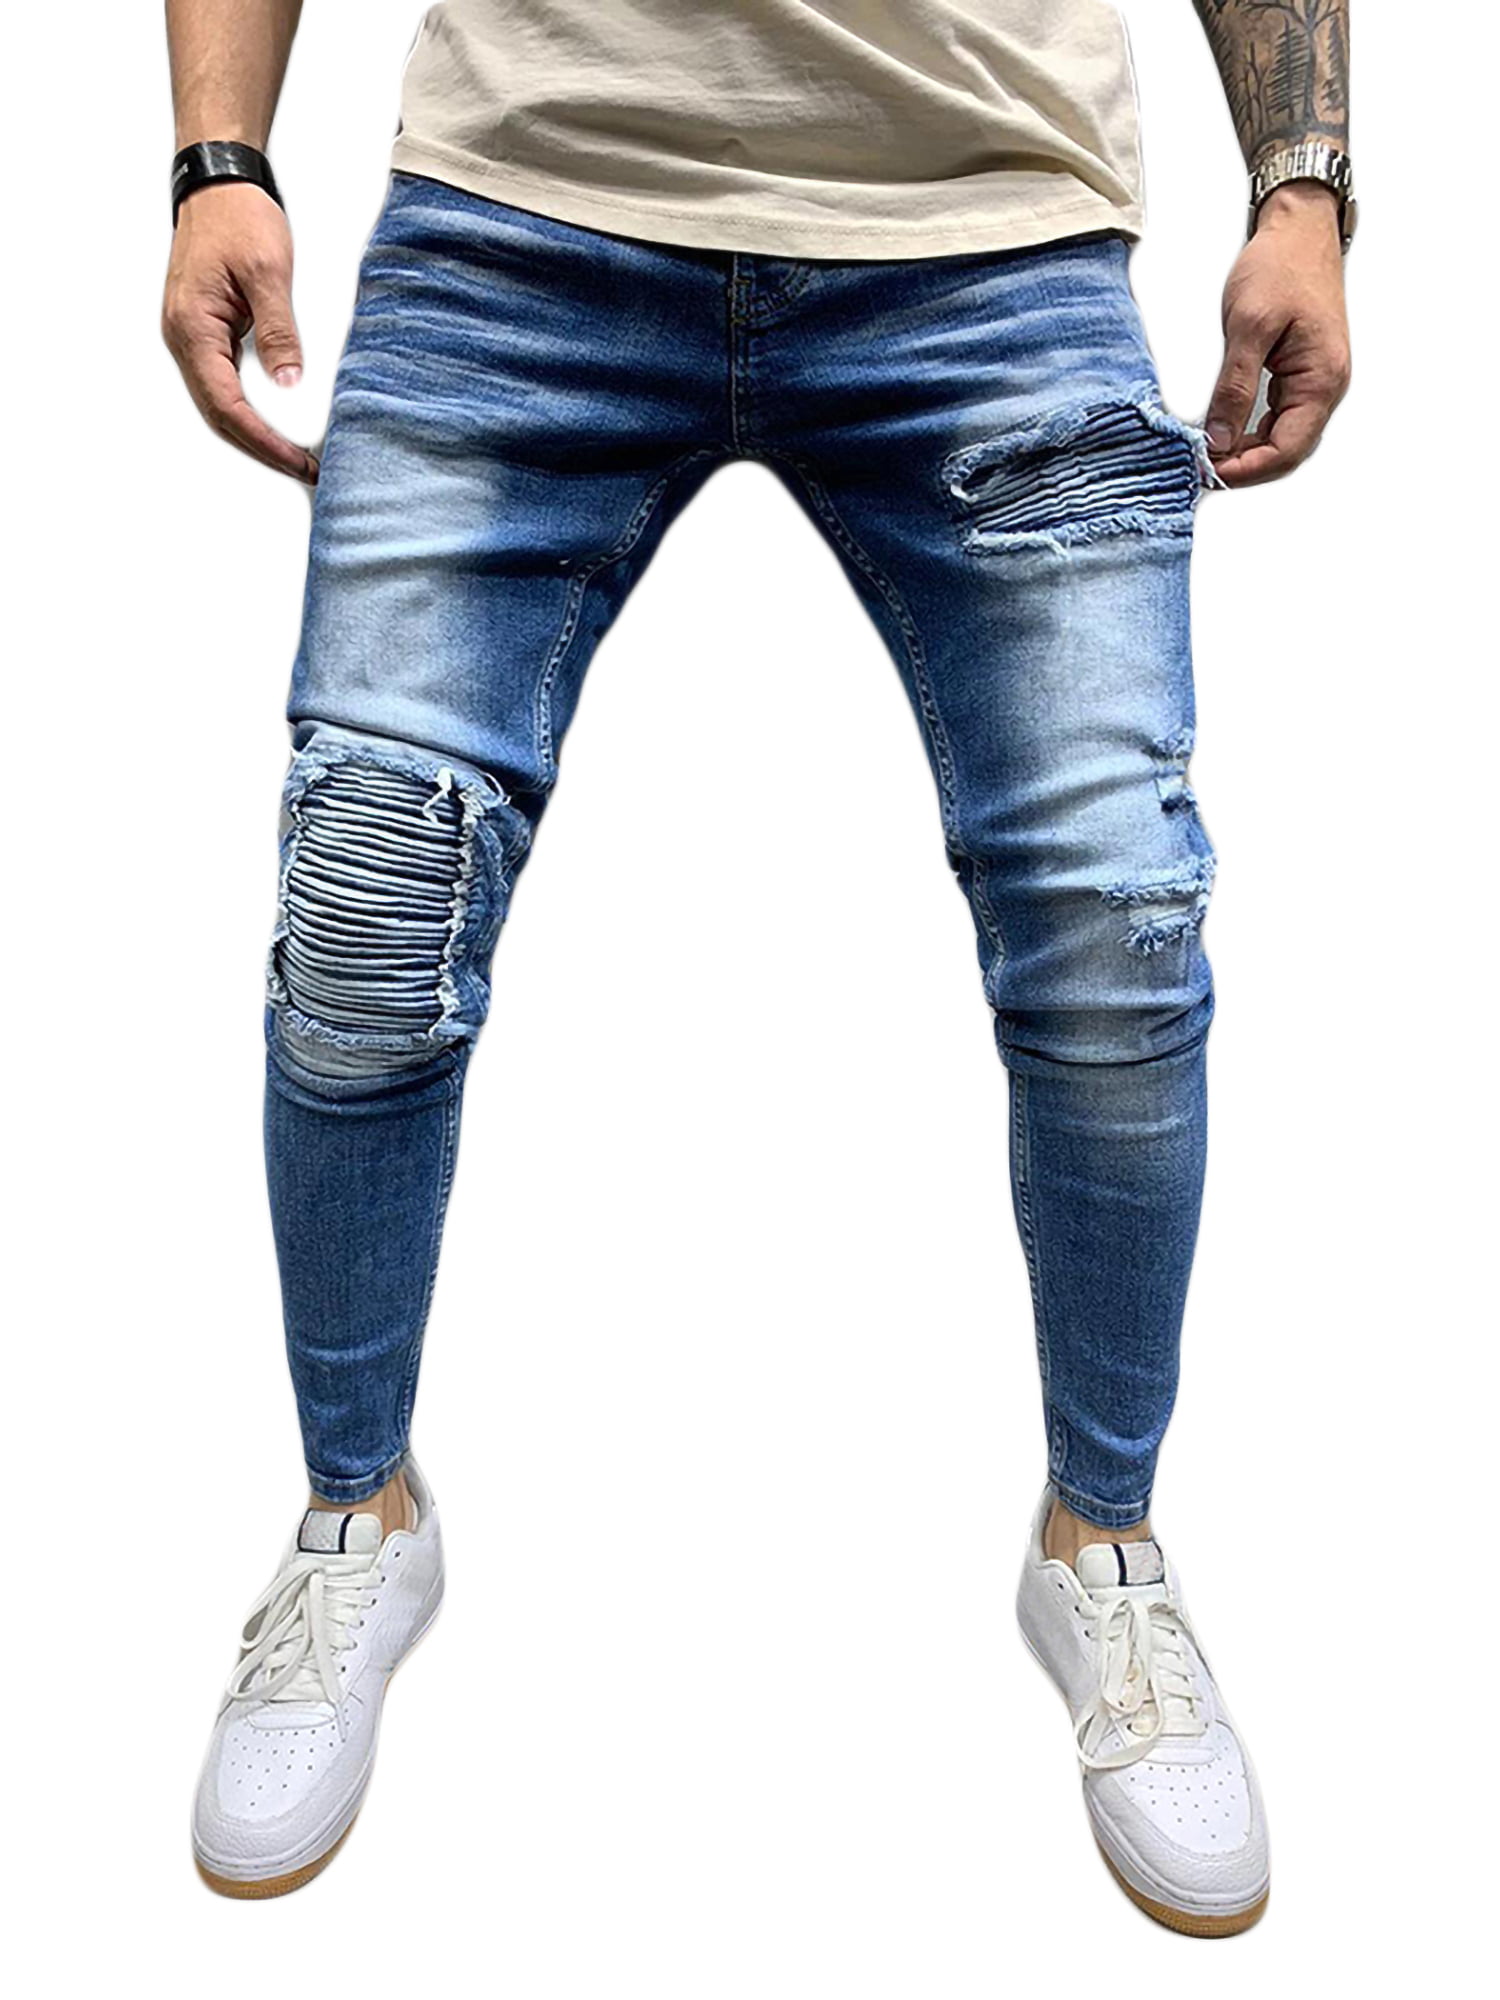 TANLANG Mens Skinny Jeans Distressed Destroyed Slim Biker Jeans Pants with Holes Jeans for Men Plus Size Stretch 